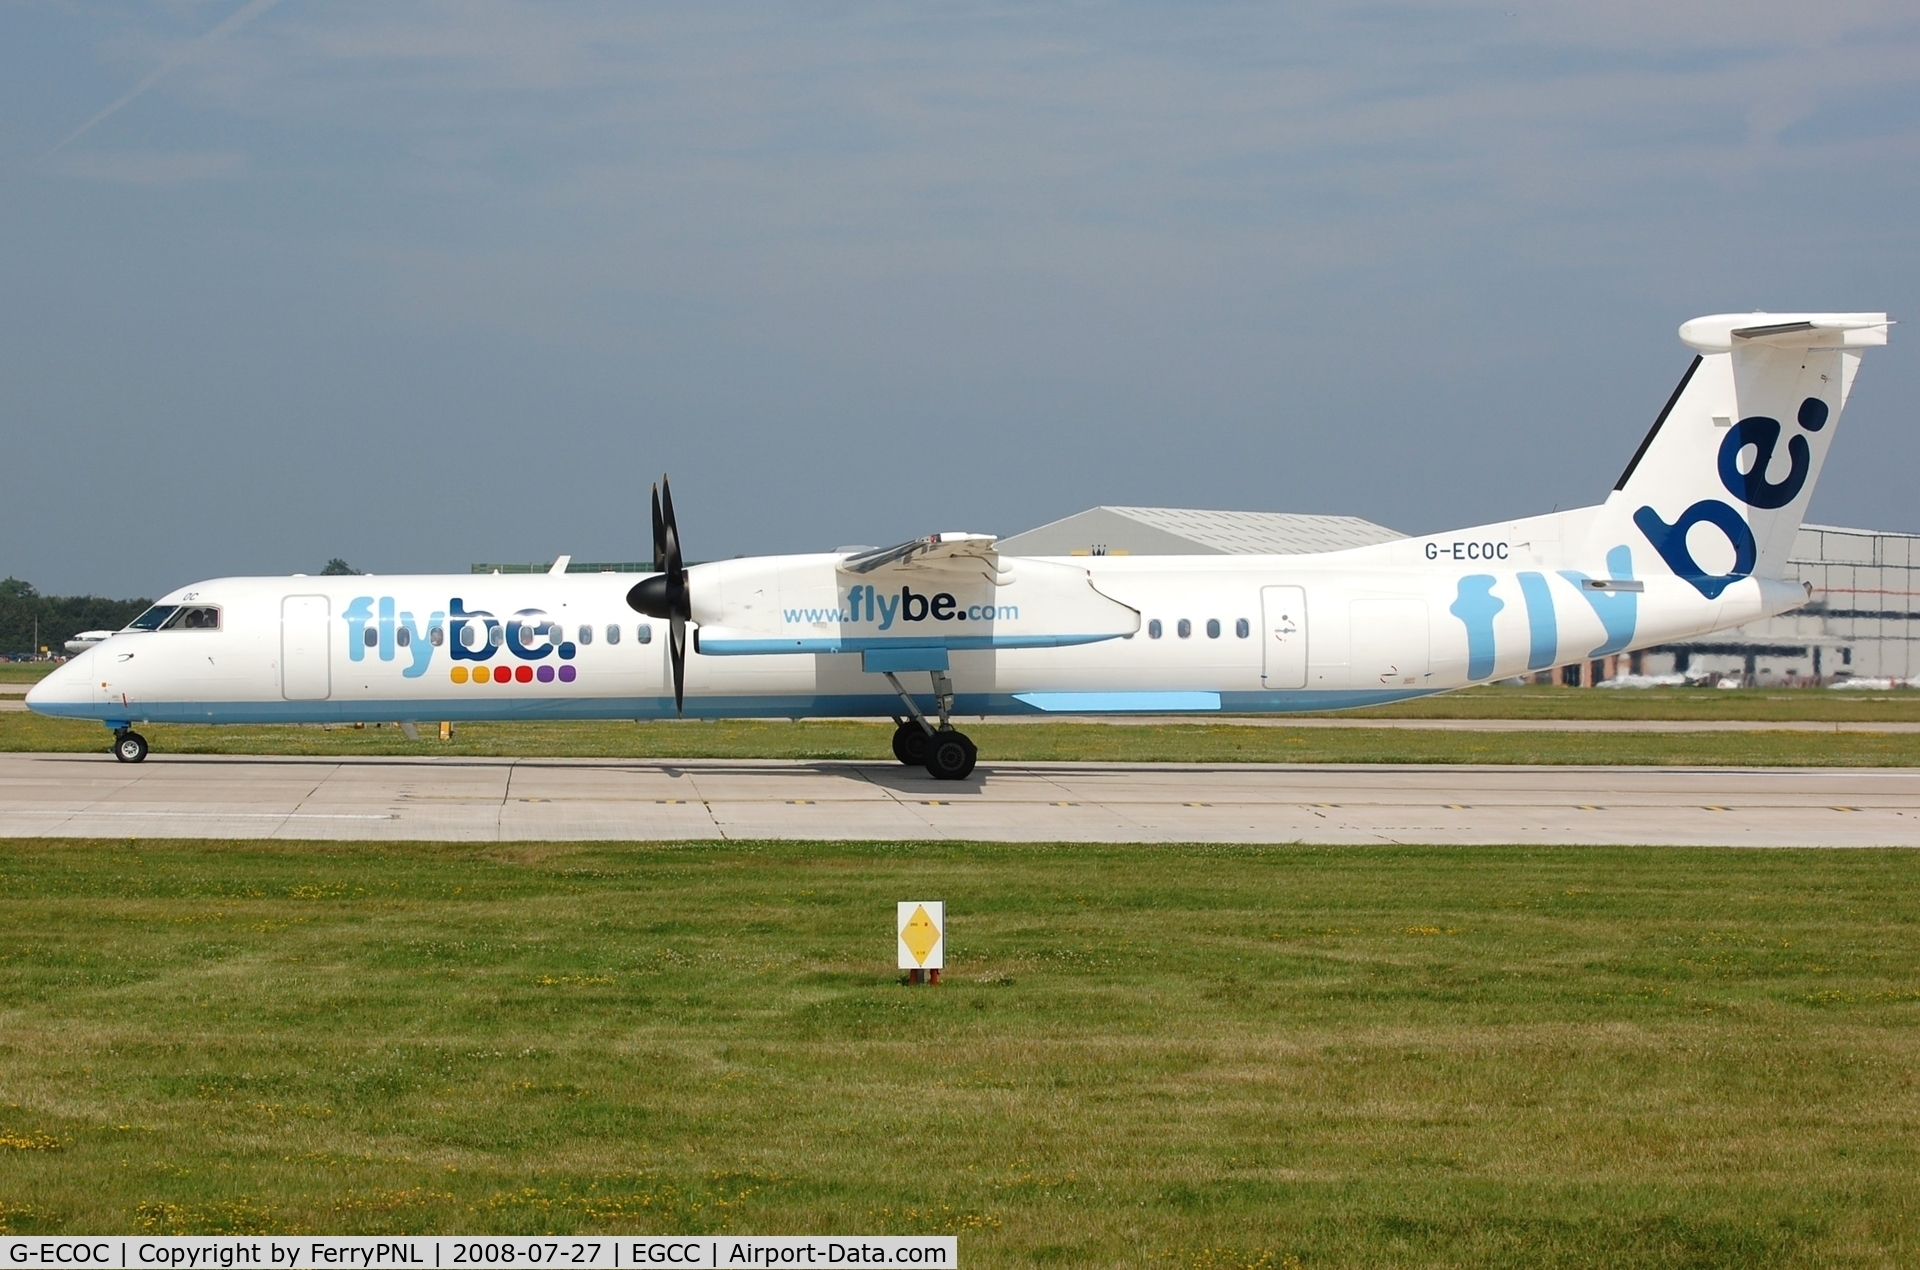 G-ECOC, 2007 De Havilland Canada DHC-8-402Q Dash 8 C/N 4197, Flybe DHC8 lined-up.